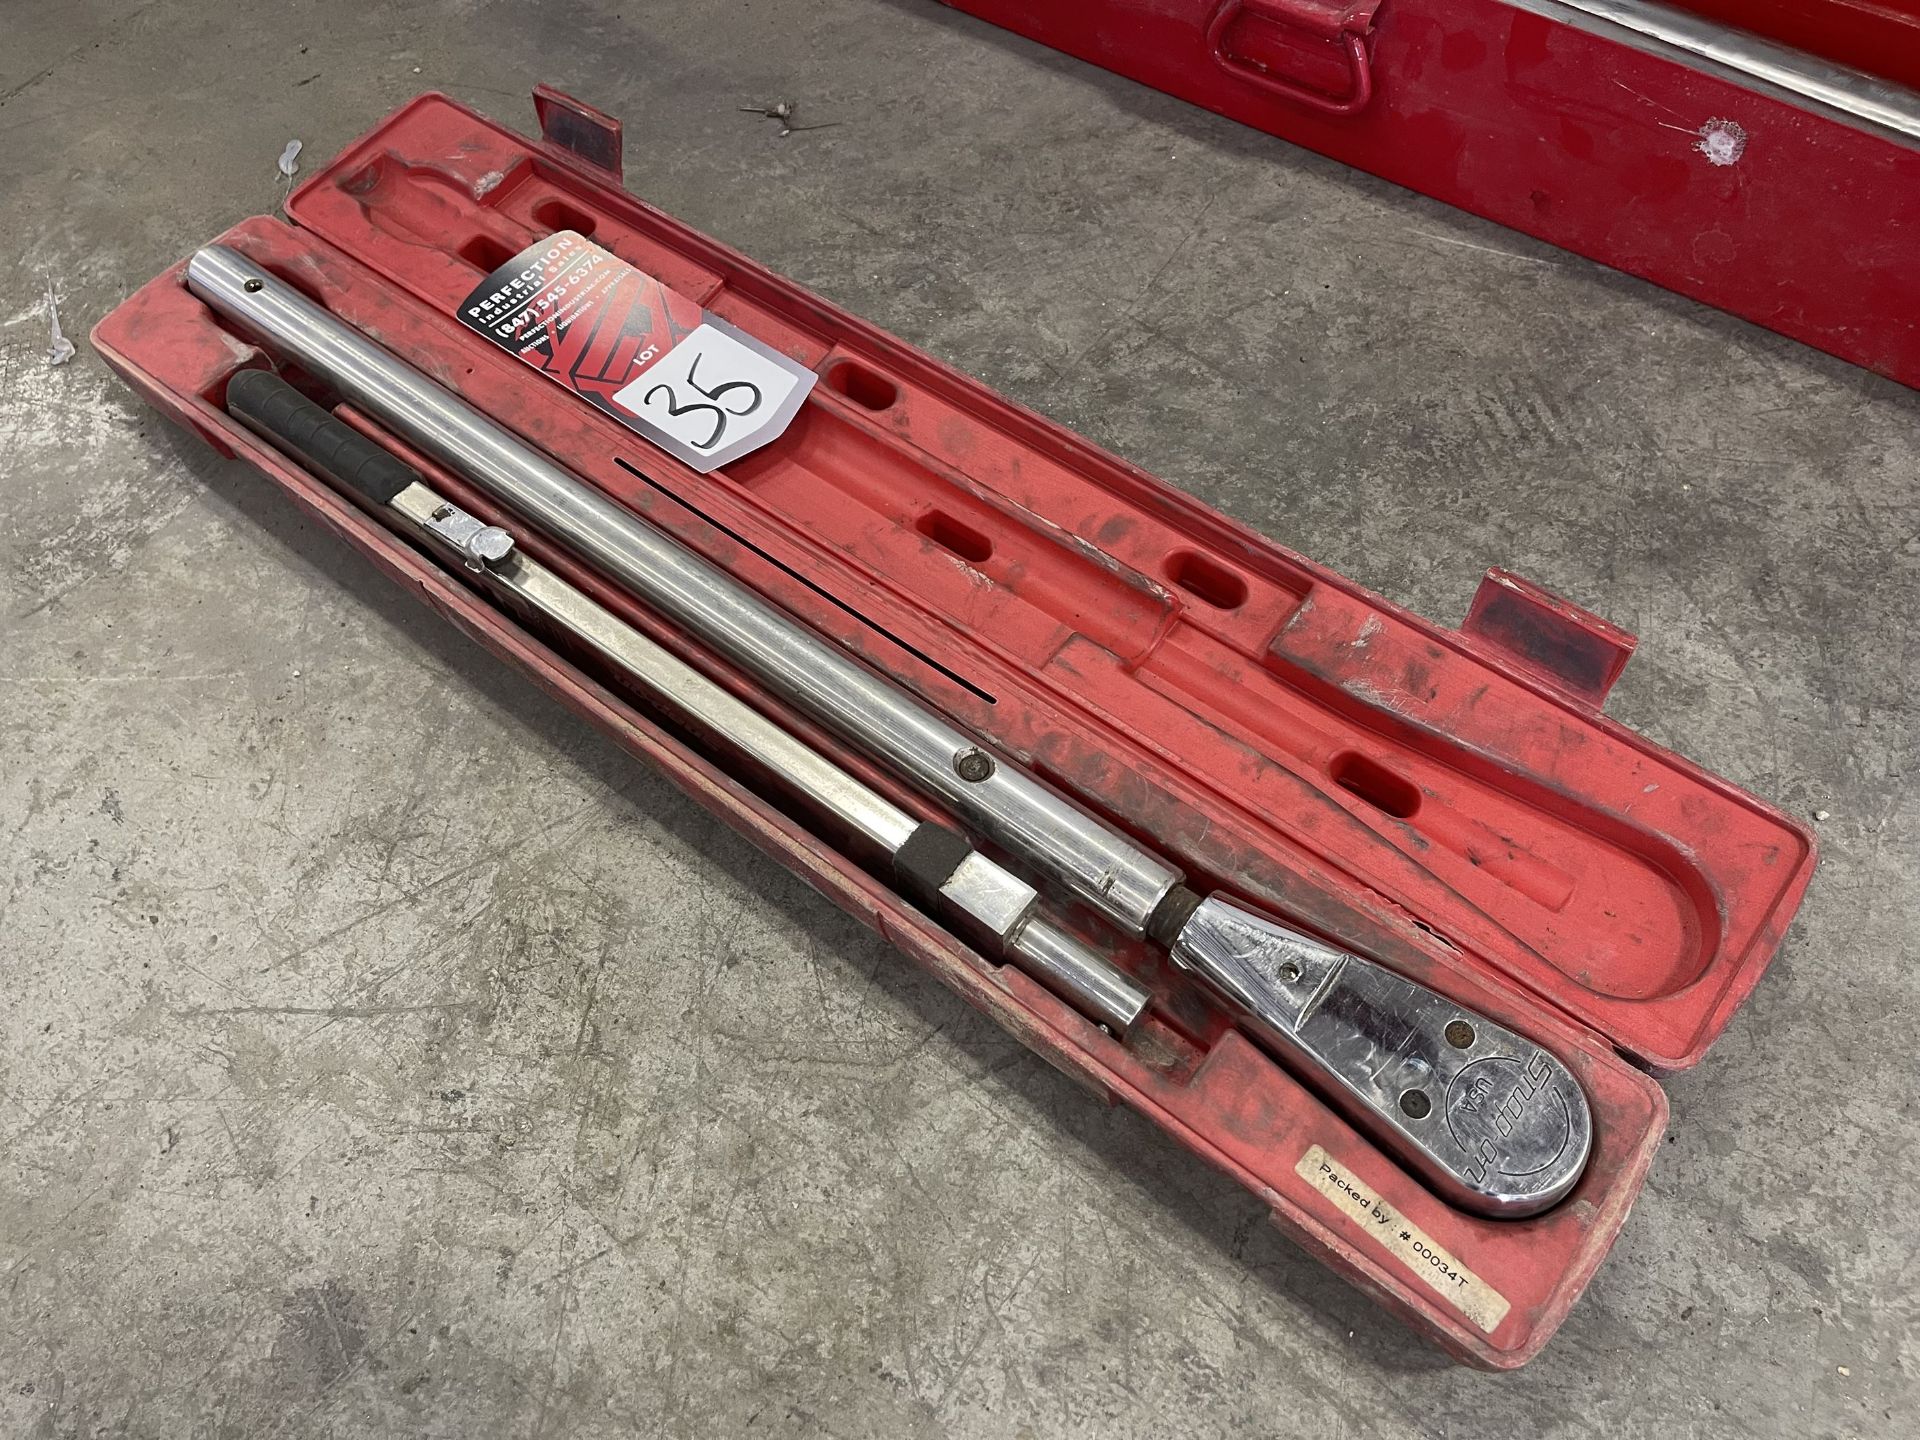 SNAP-ON 200-600 Ft Lb. Torque Wrench